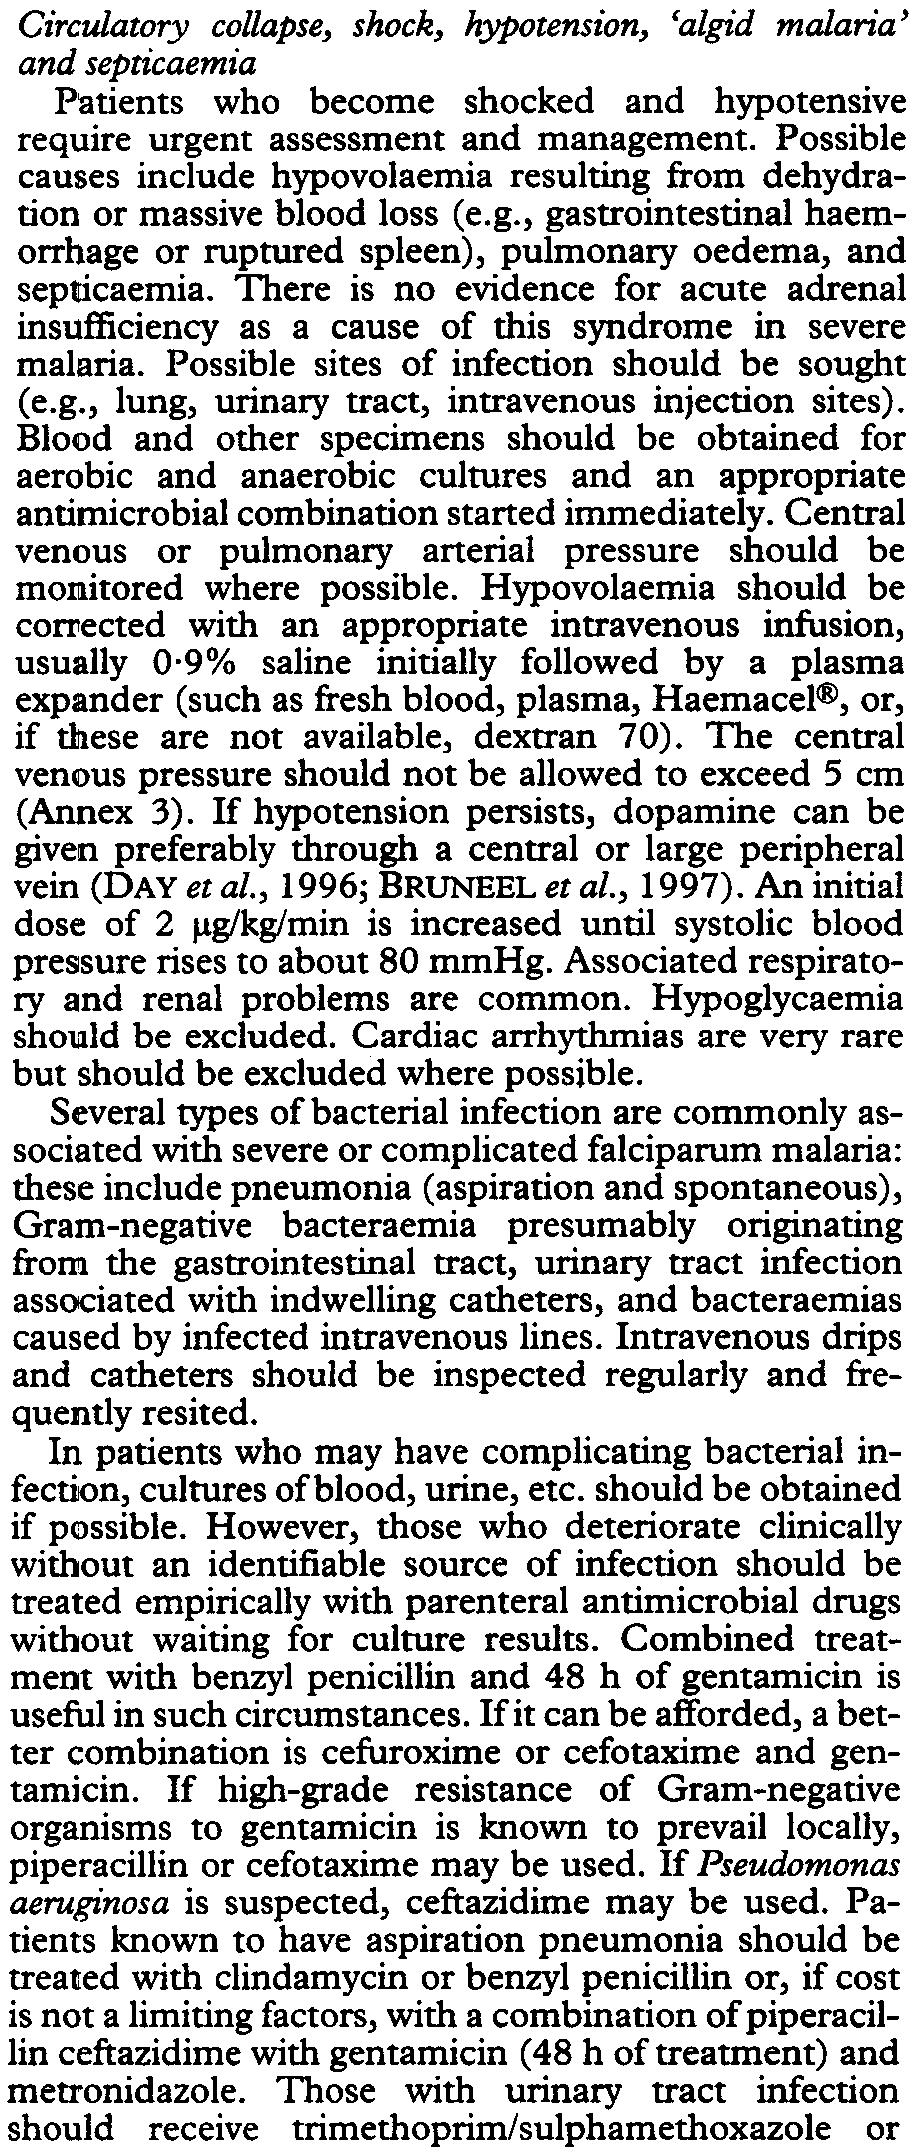 (1993) suggested that exchange transfusion (see p. 81/41) was a useful adjunct to the treatment of adult respiratory distress syndrome. However, VACHON et al.